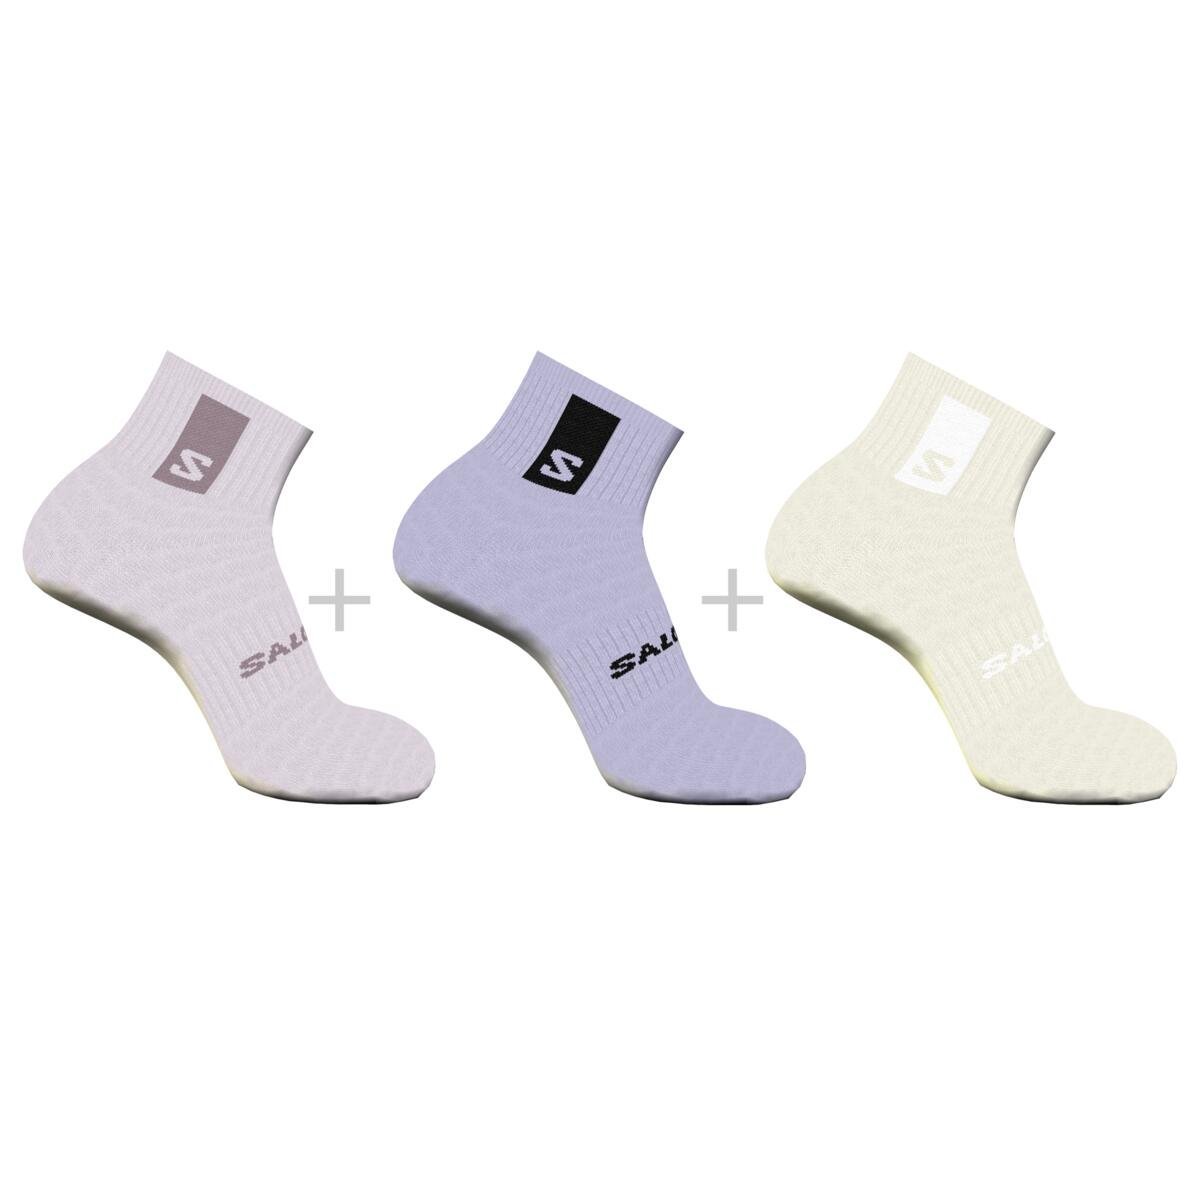 LC2376300_0_VIR_EVERYDAY ANKLE 3 PACK_HUSHED-PURPLE-ALMOND.png.cq5dam.web.1200.1200